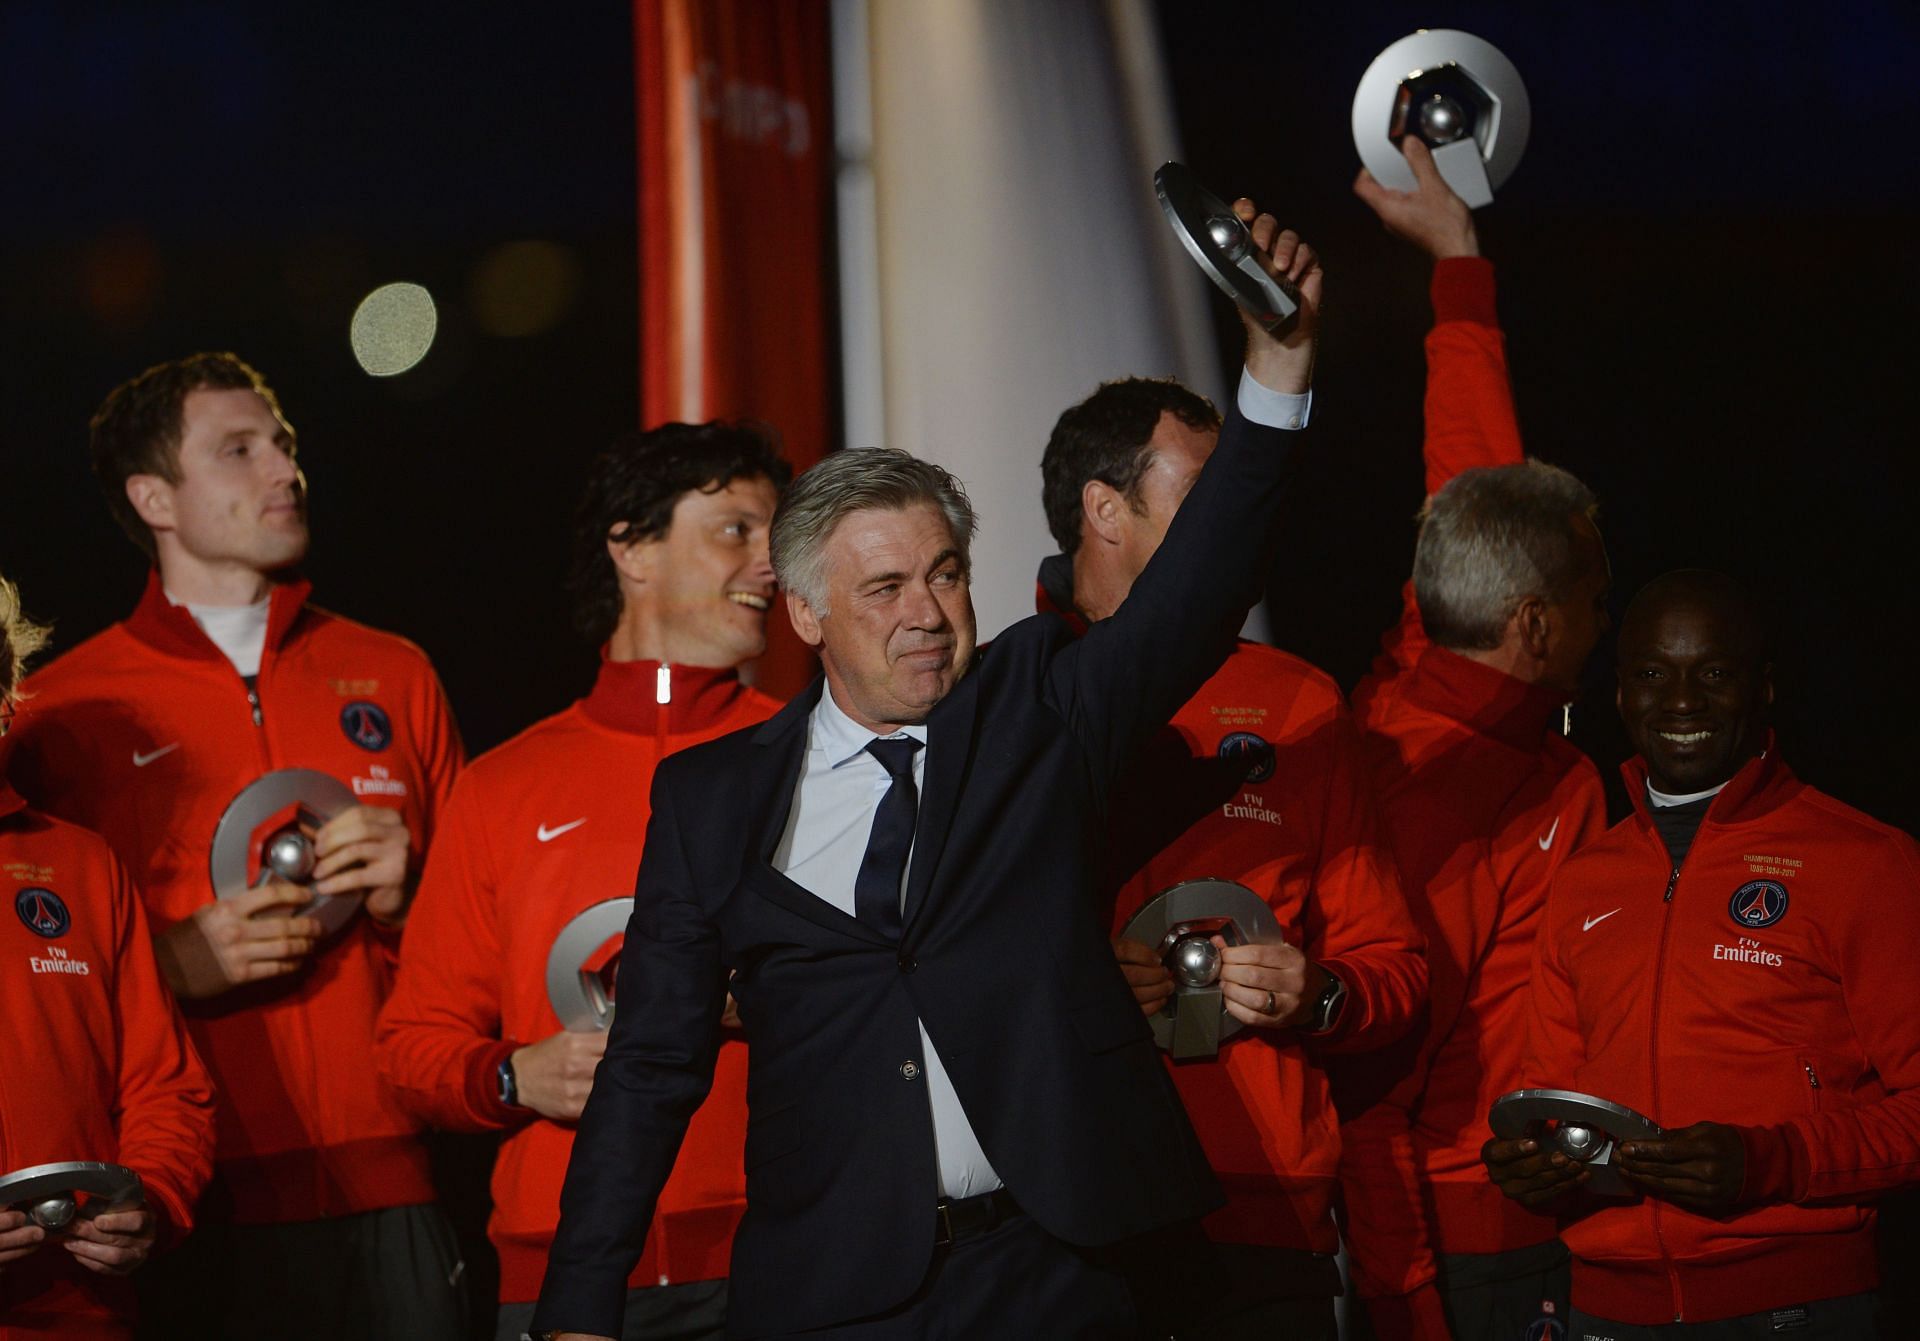 Carlo Ancelotti waves to the fans after a presentation.